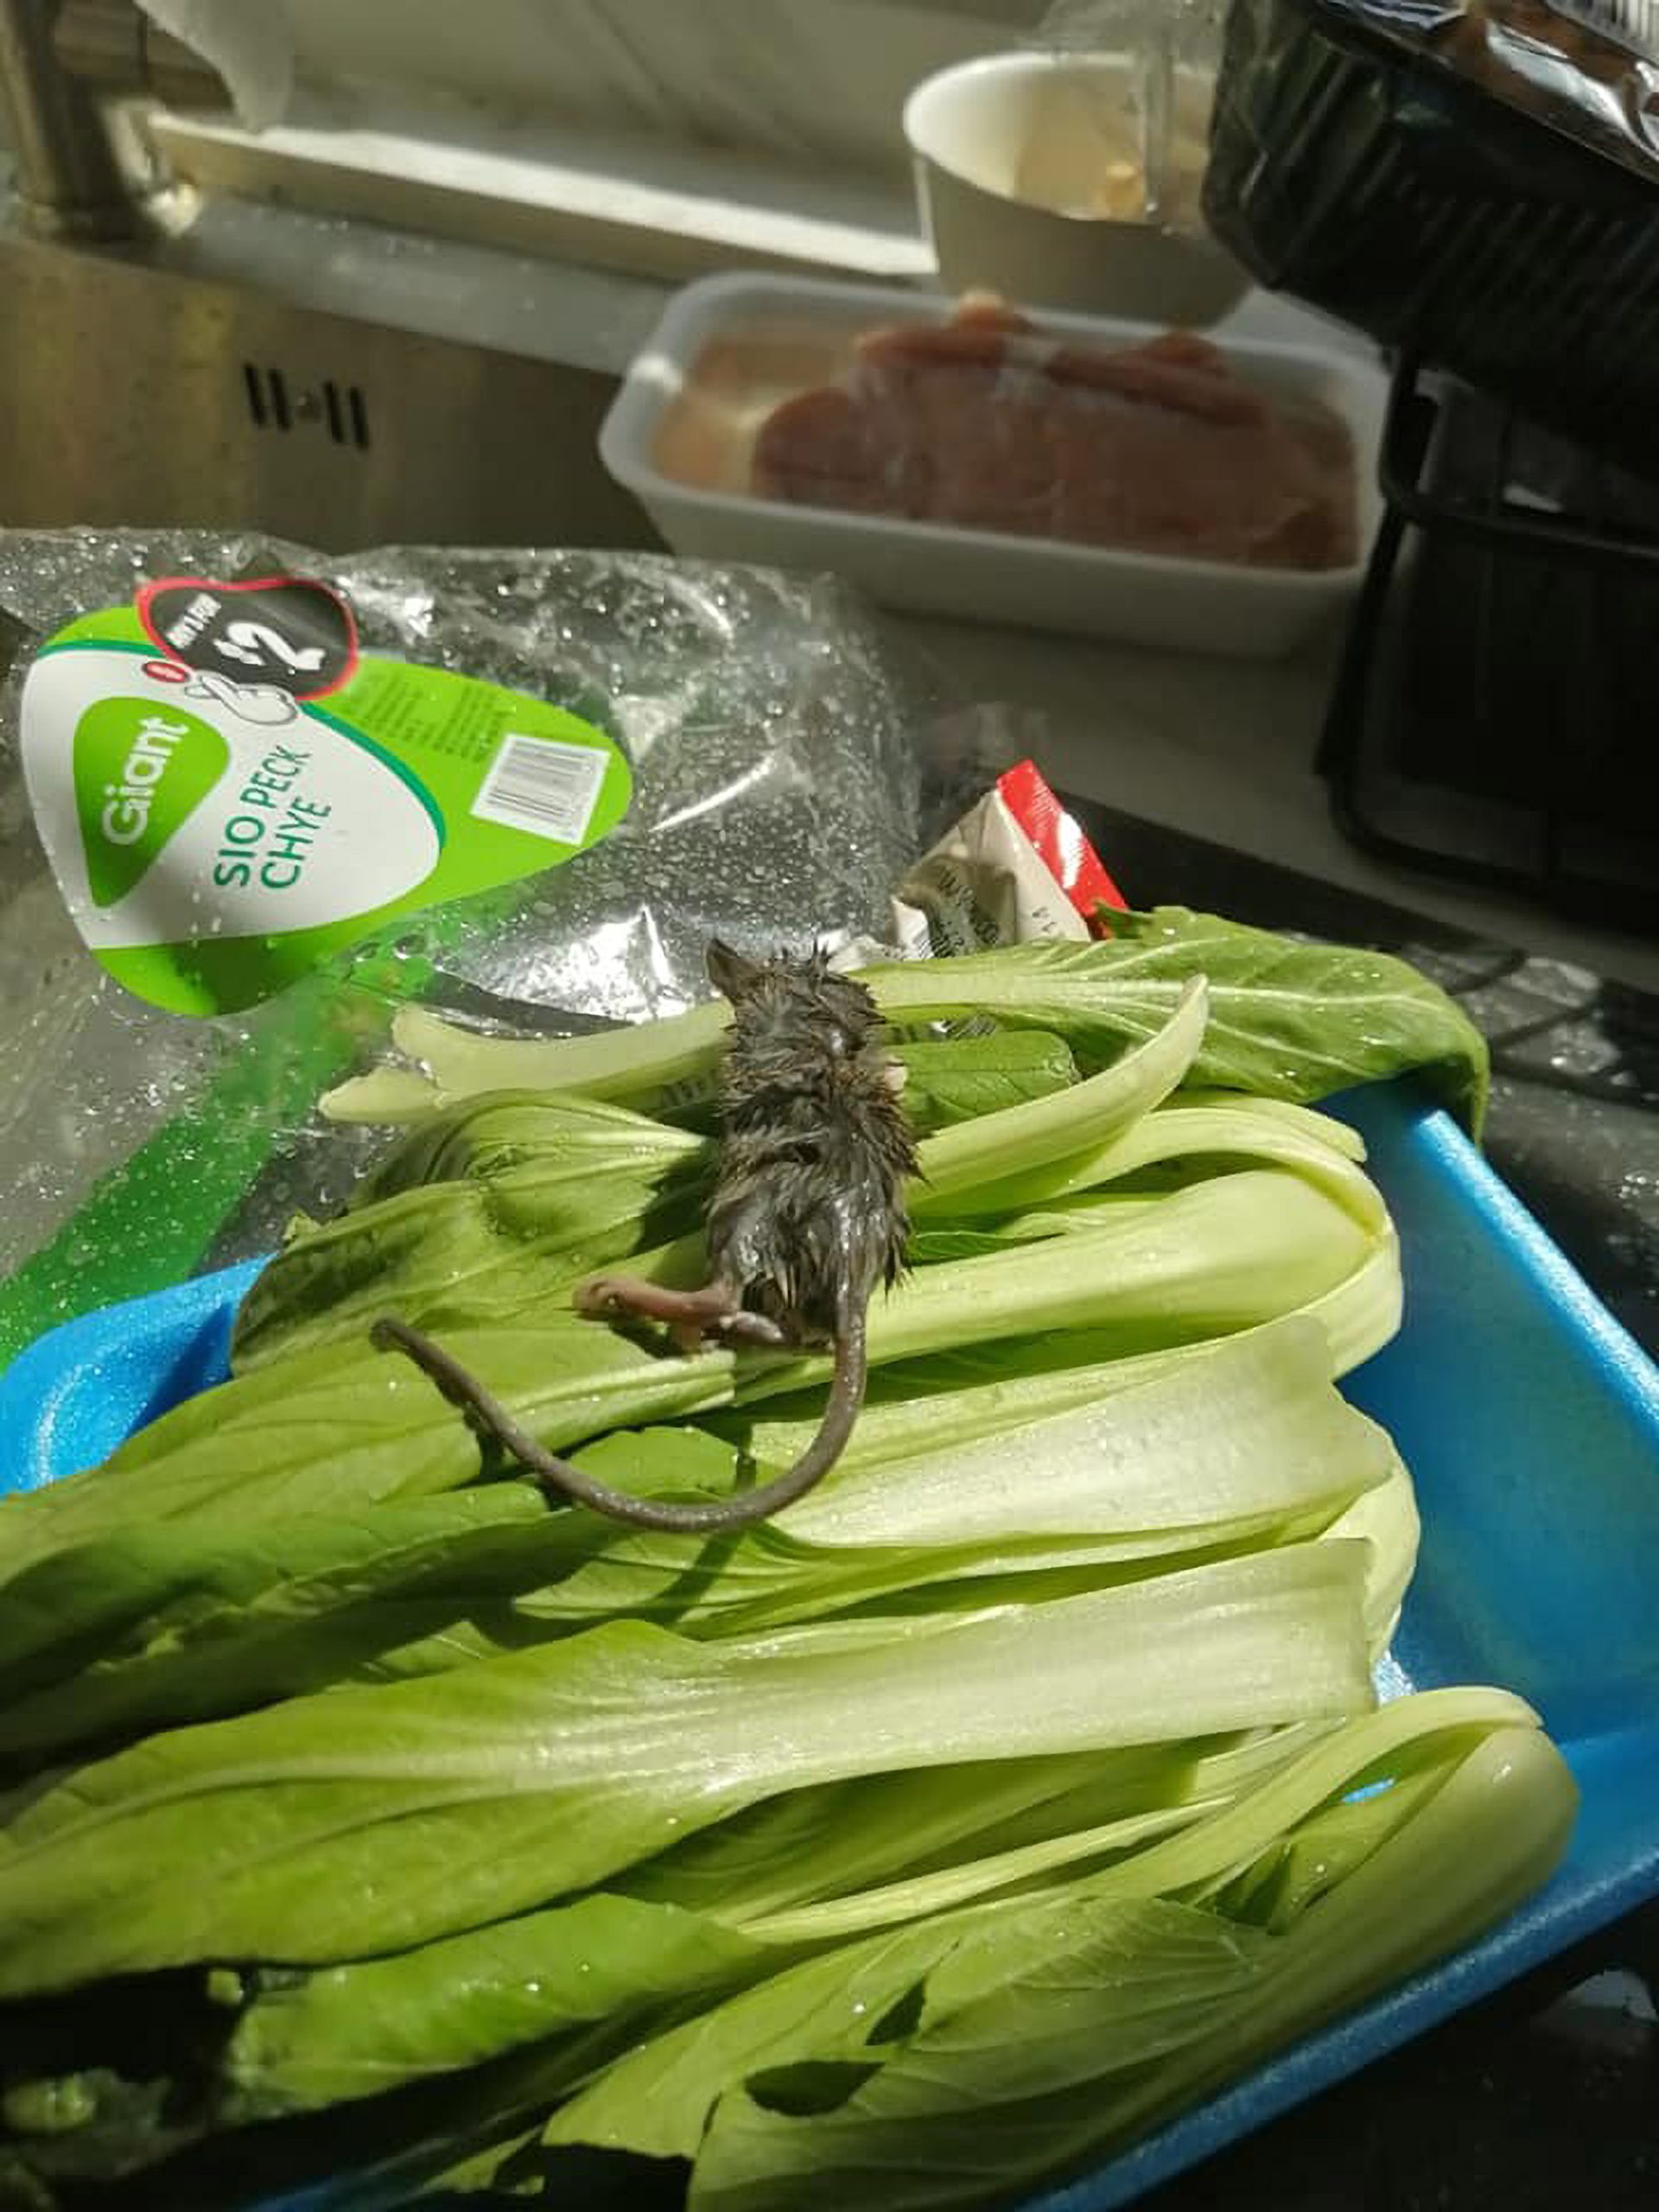 Read more about the article RAT’S DISGUSTING: Horrified Shopper Finds Dead Rat In Veg Pack